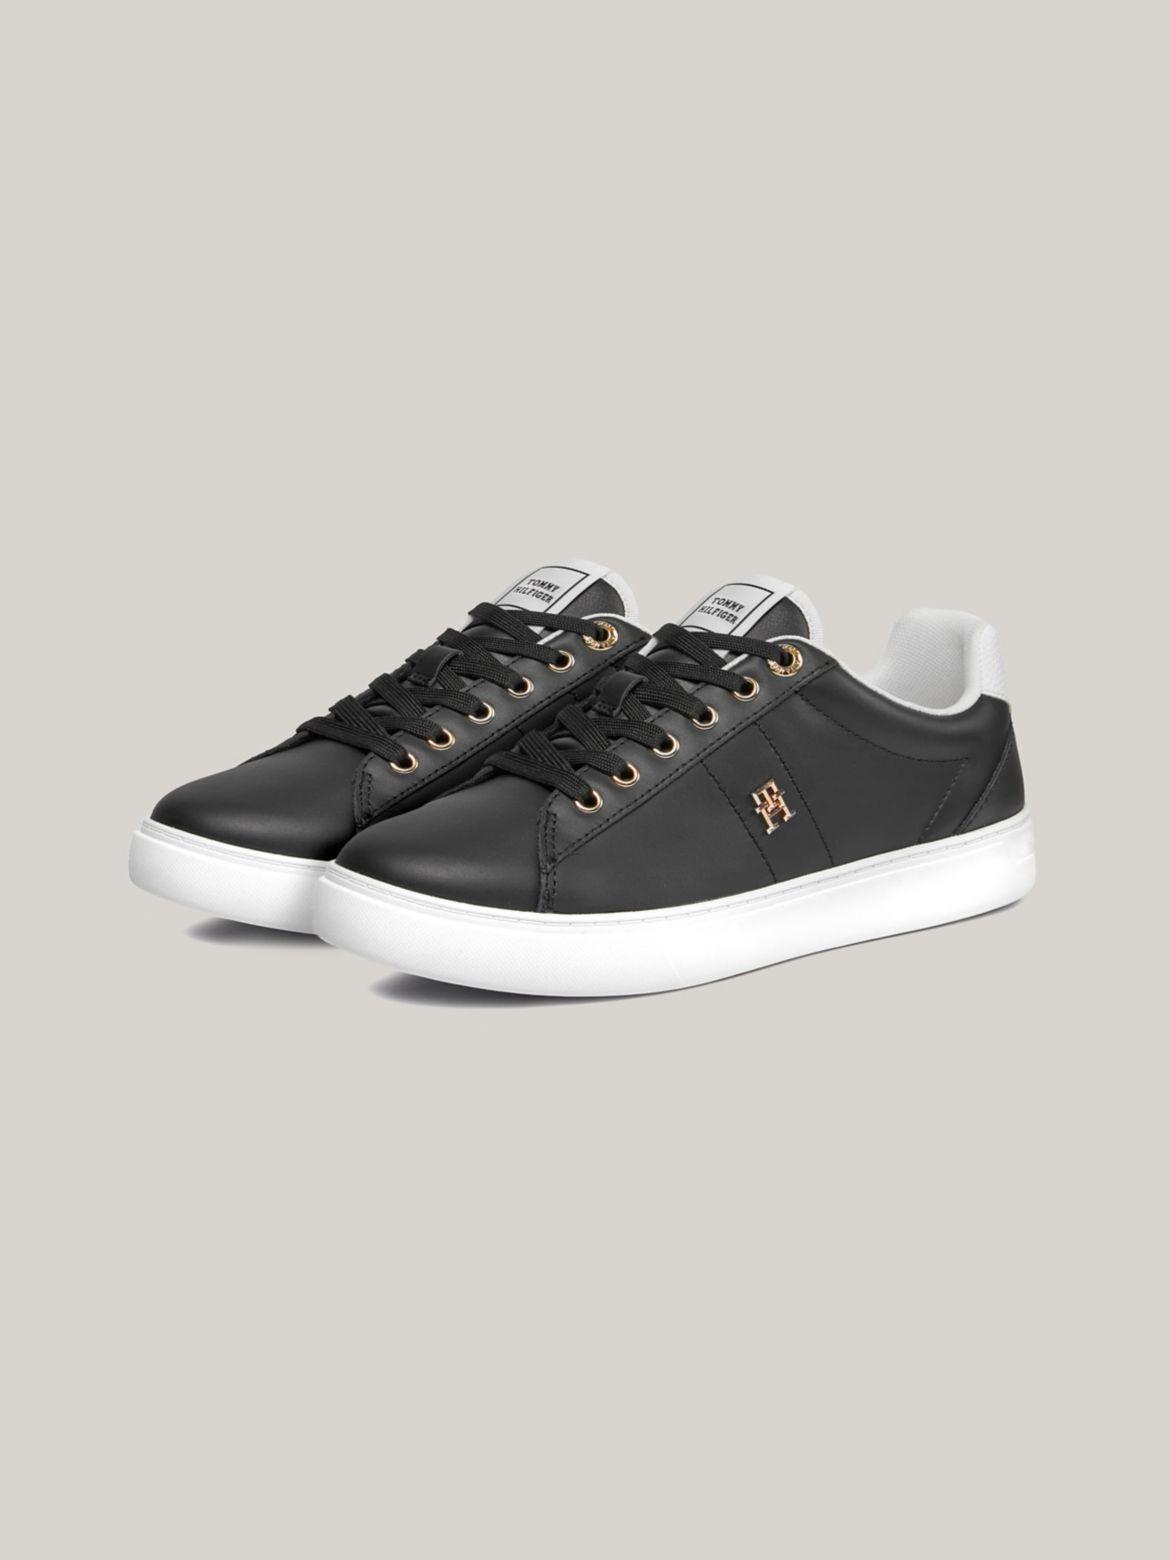 Tommy Hilfiger Women's Monogram Leather Cupsole Sneaker Product Image